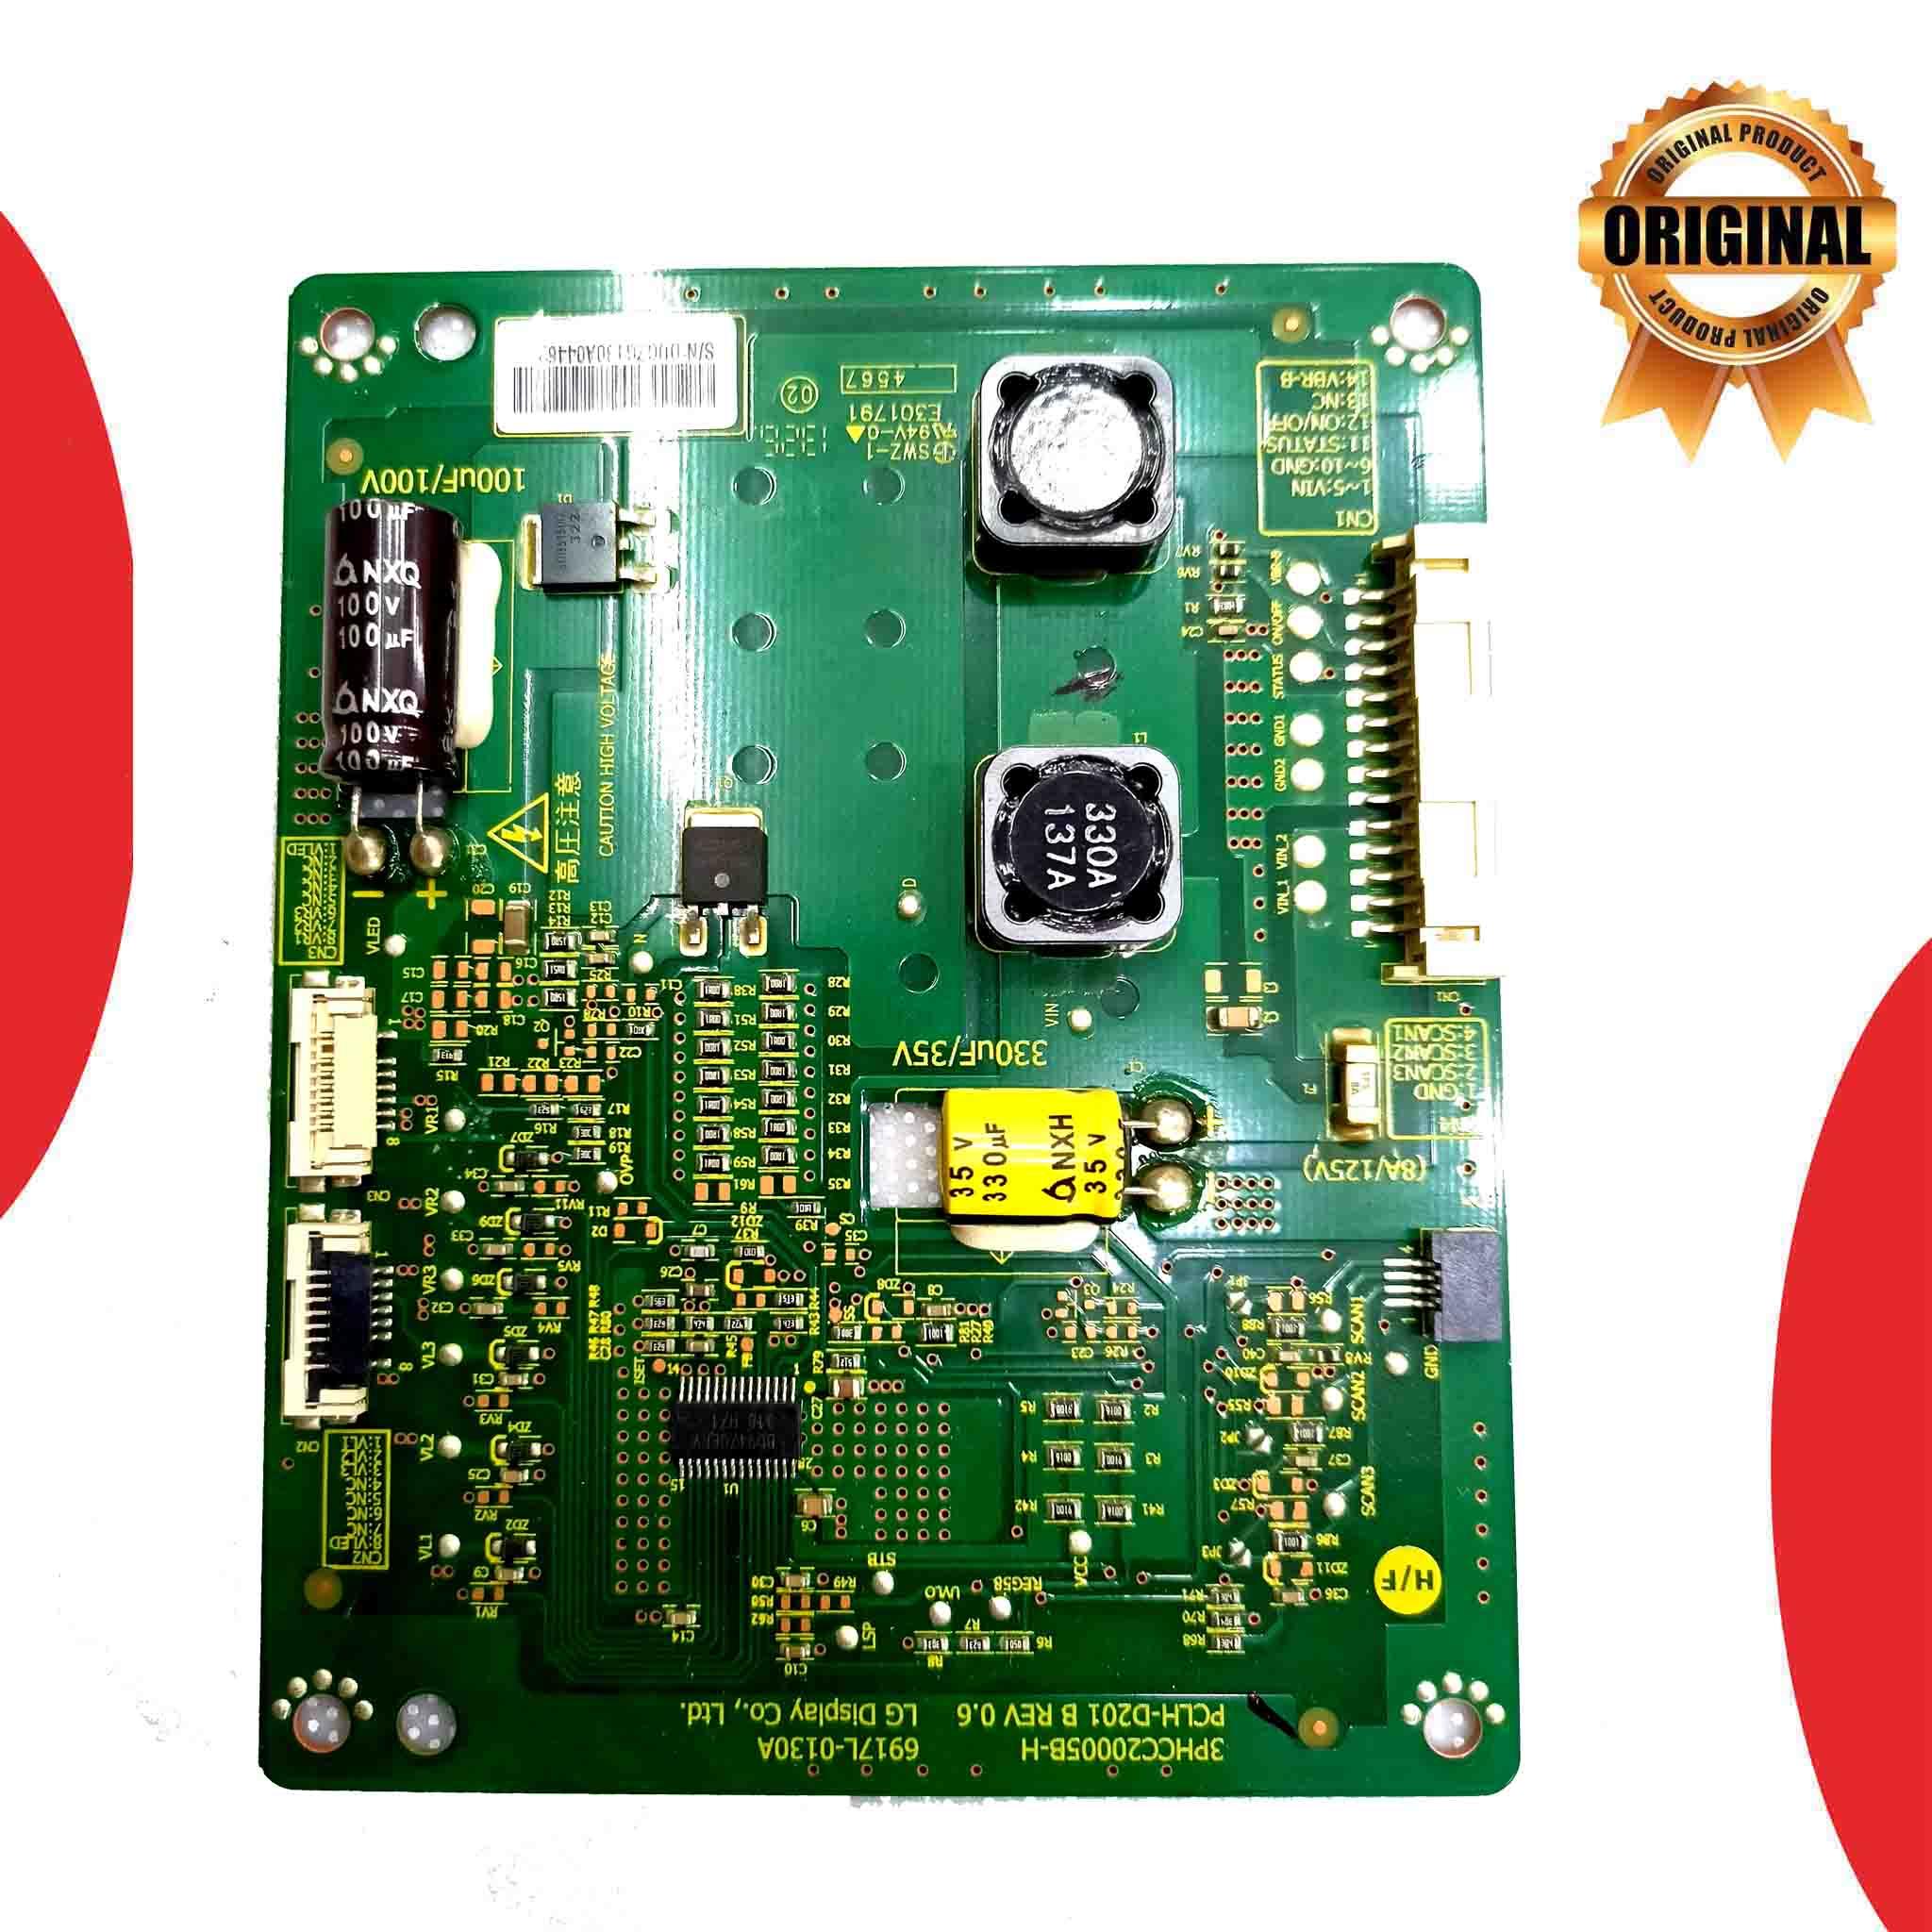 Model RELEE4701 Reconnect LED TV PCB - Great Bharat Electronics